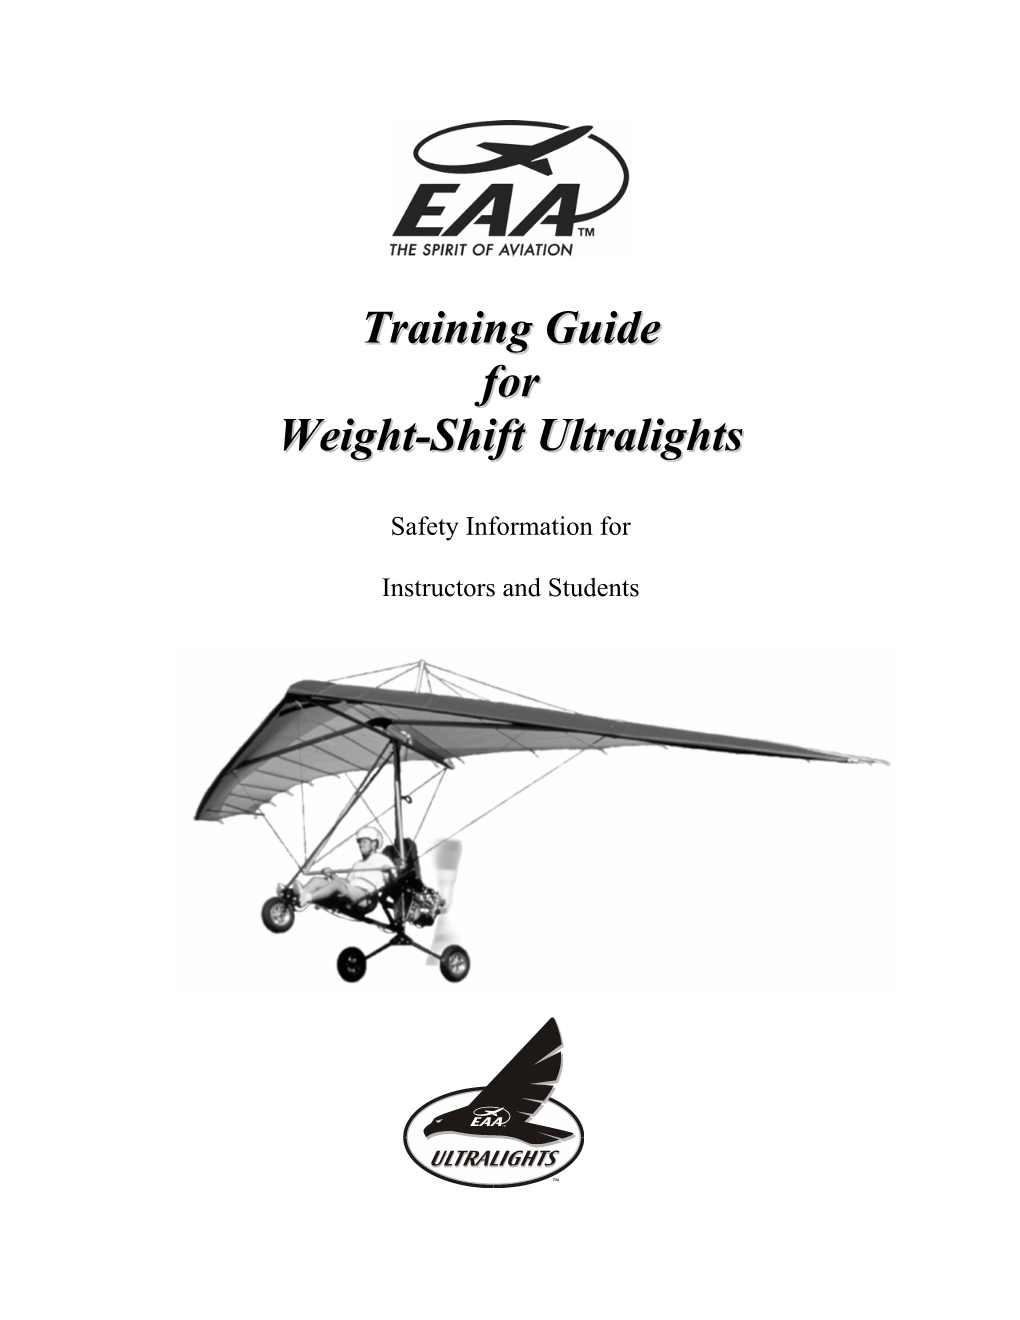 Training Guide for Weight-Shift Ultralights